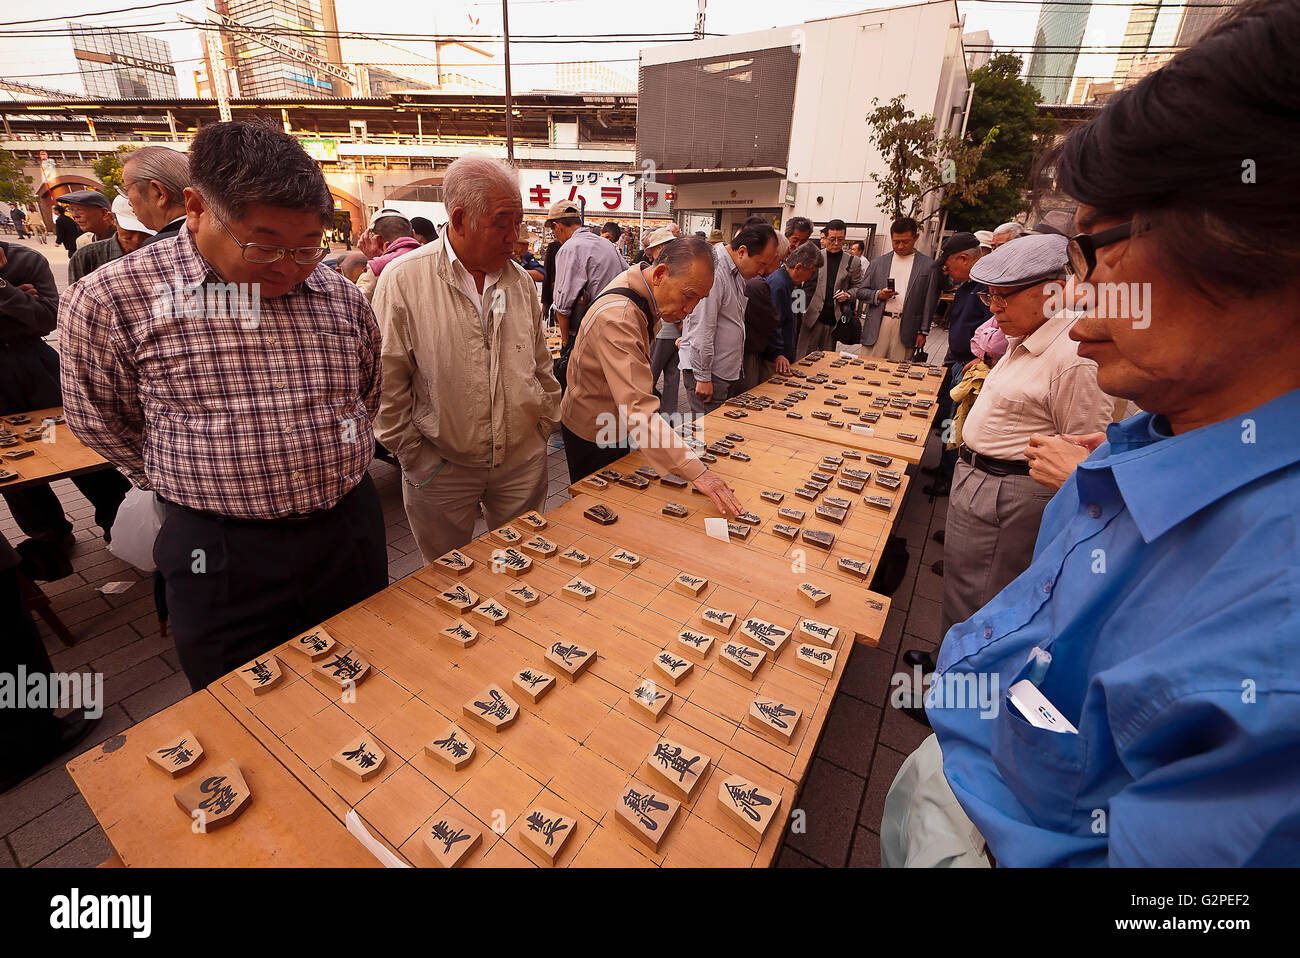 Shimbashi, Outside Shimbashi JR station, large group of men, all over fifty years old, playing Shogi, Japanese chess, on large boards with large pieces, all standing, other men watch. Stock Photo